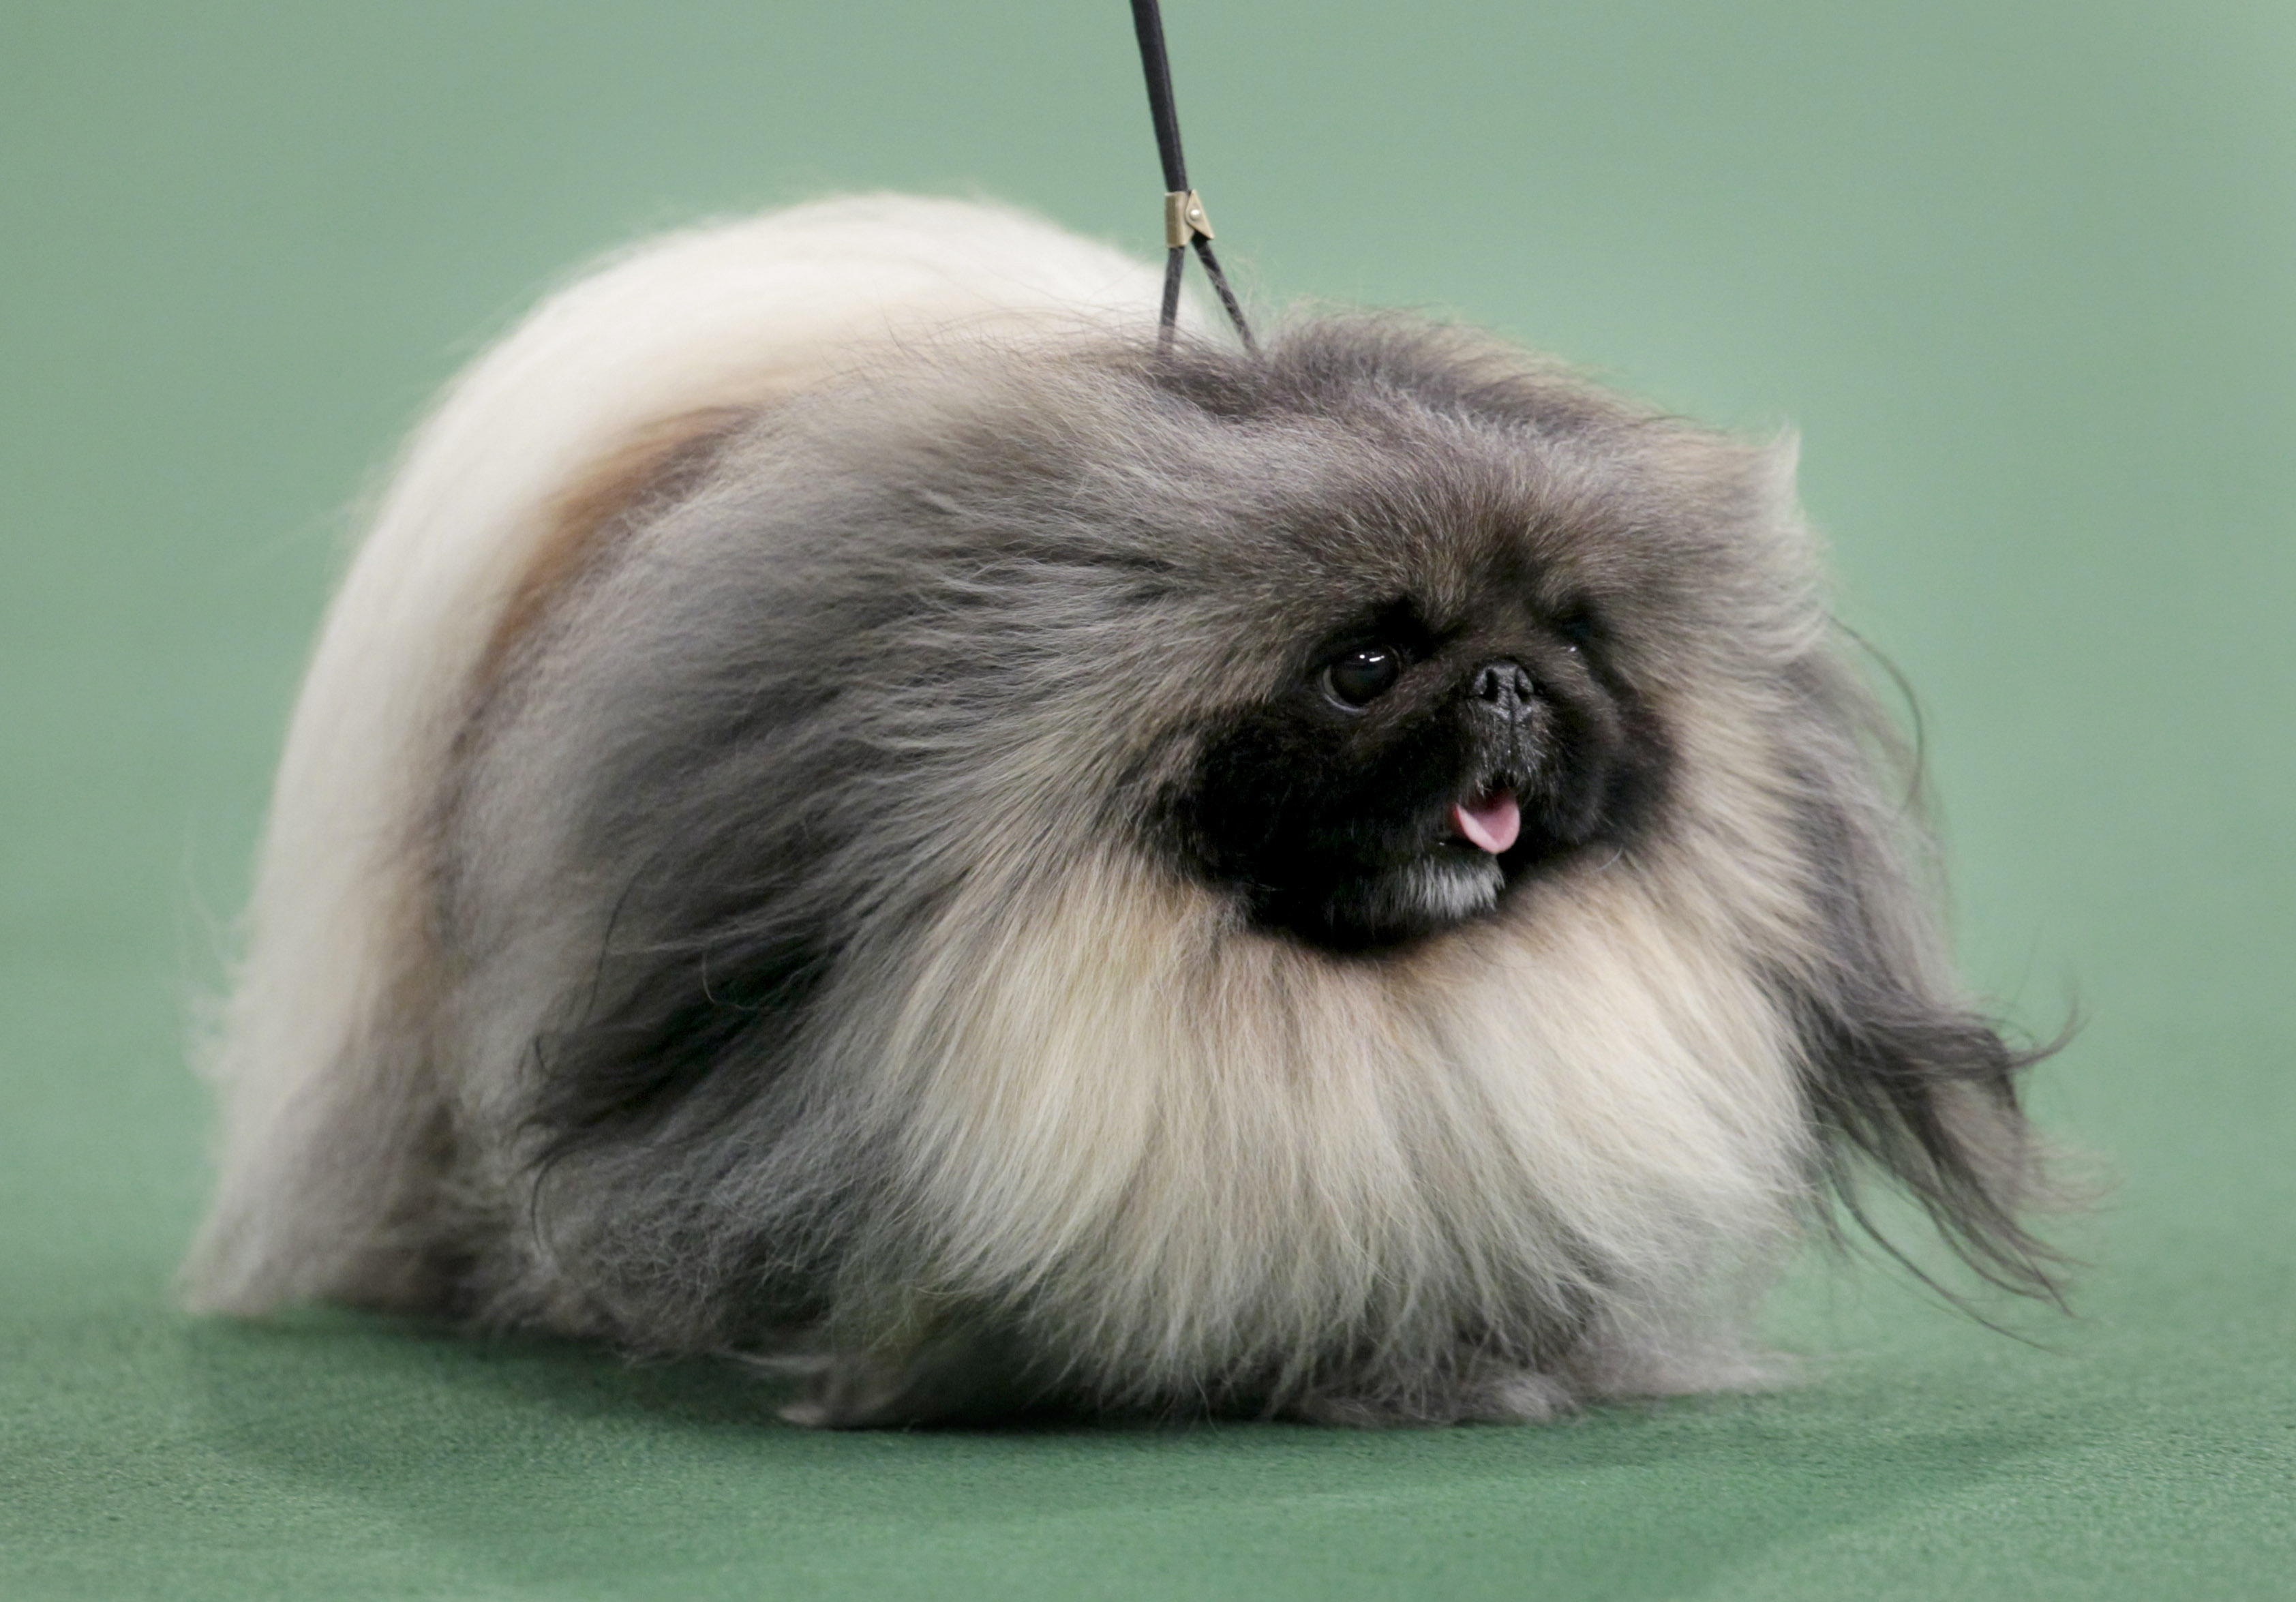 Perky Pekingese claims Westminster’s top prize The SpokesmanReview